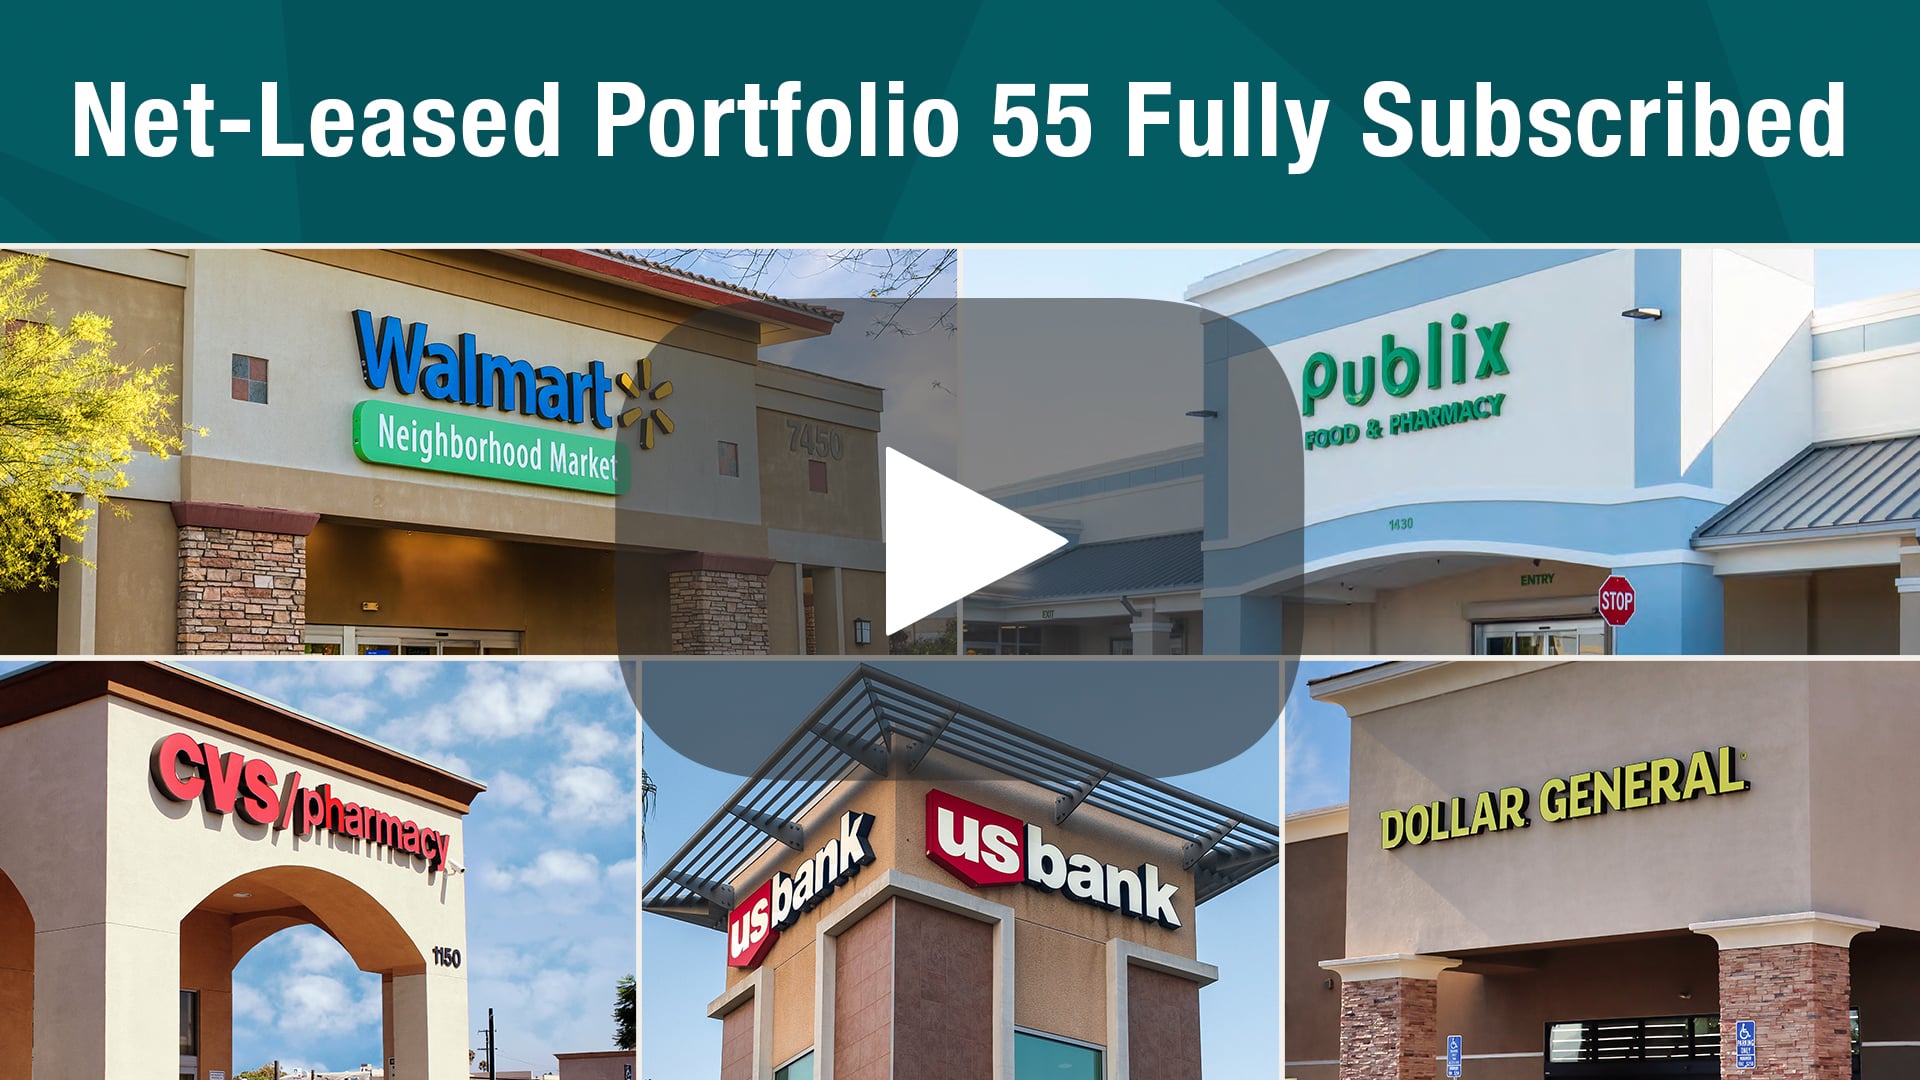 Net-Leased Portfolio 55 - Fully Subscribed